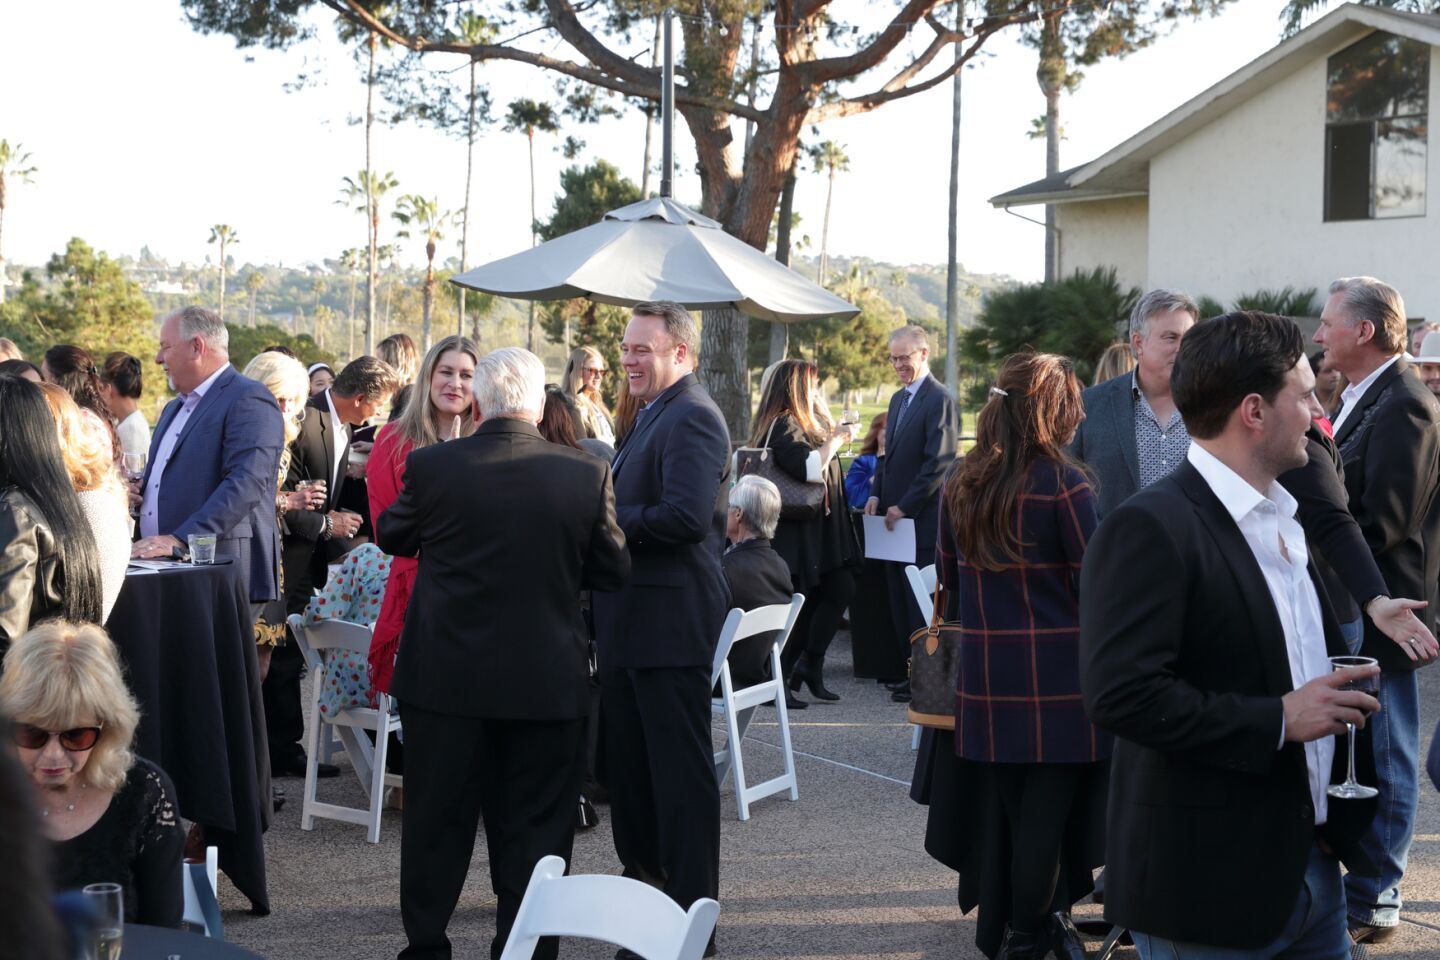 The Tea3 Foundation held its first 2022 fundraiser at Morgan Run Country Club